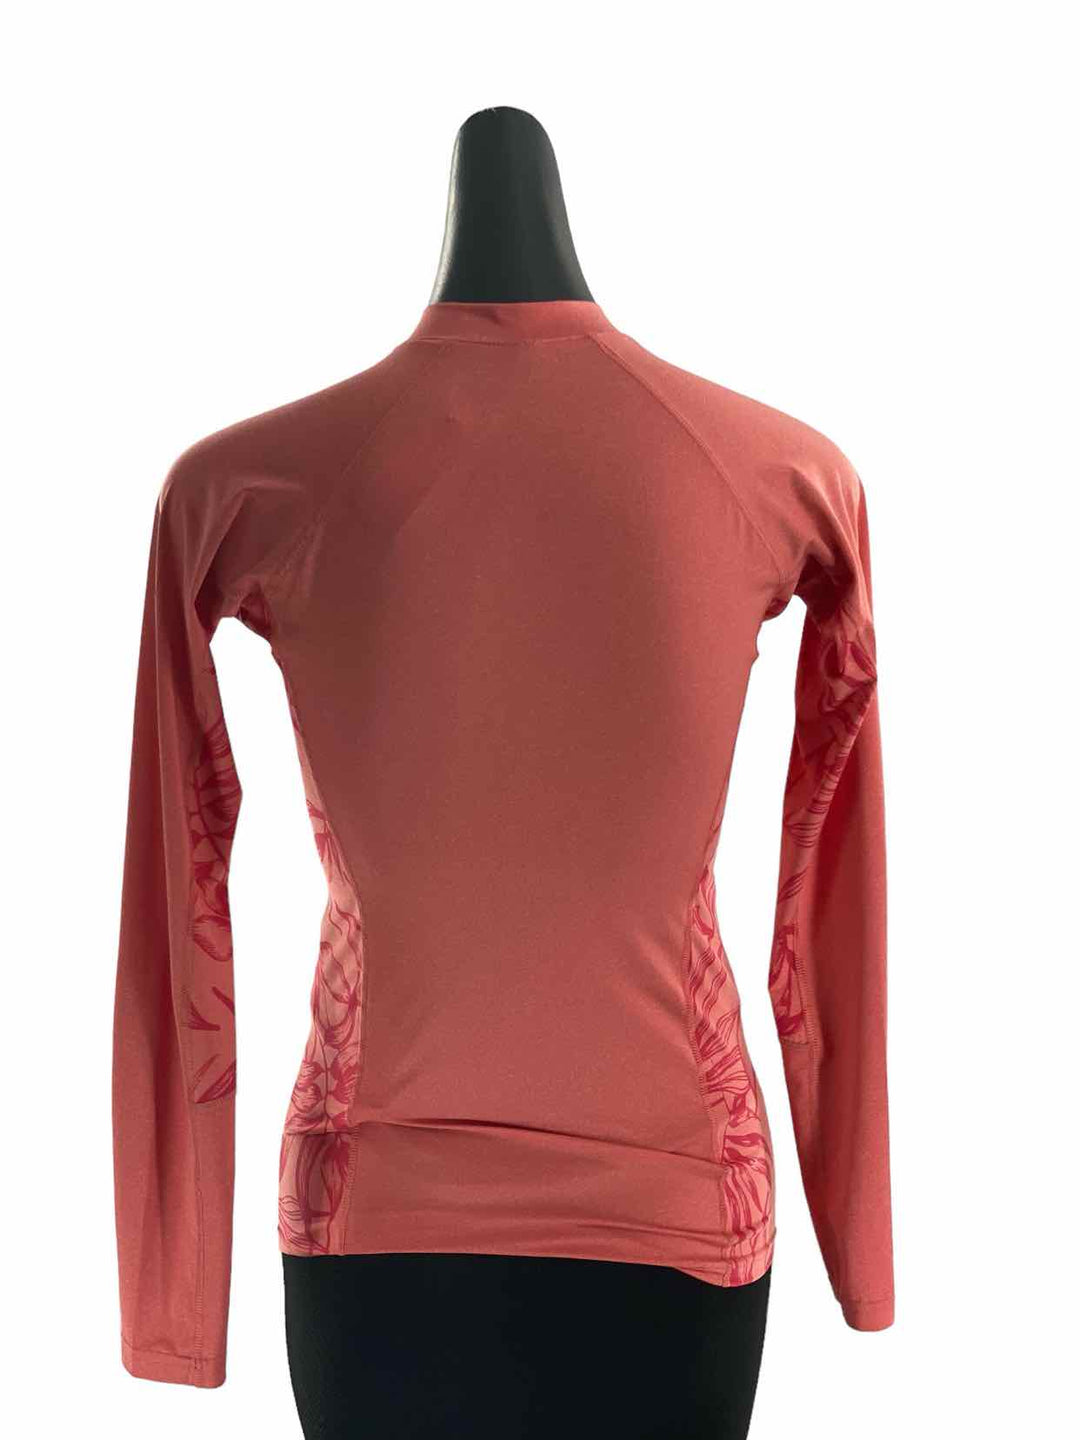 Ripcurl Size M Coral Athletic Jacket